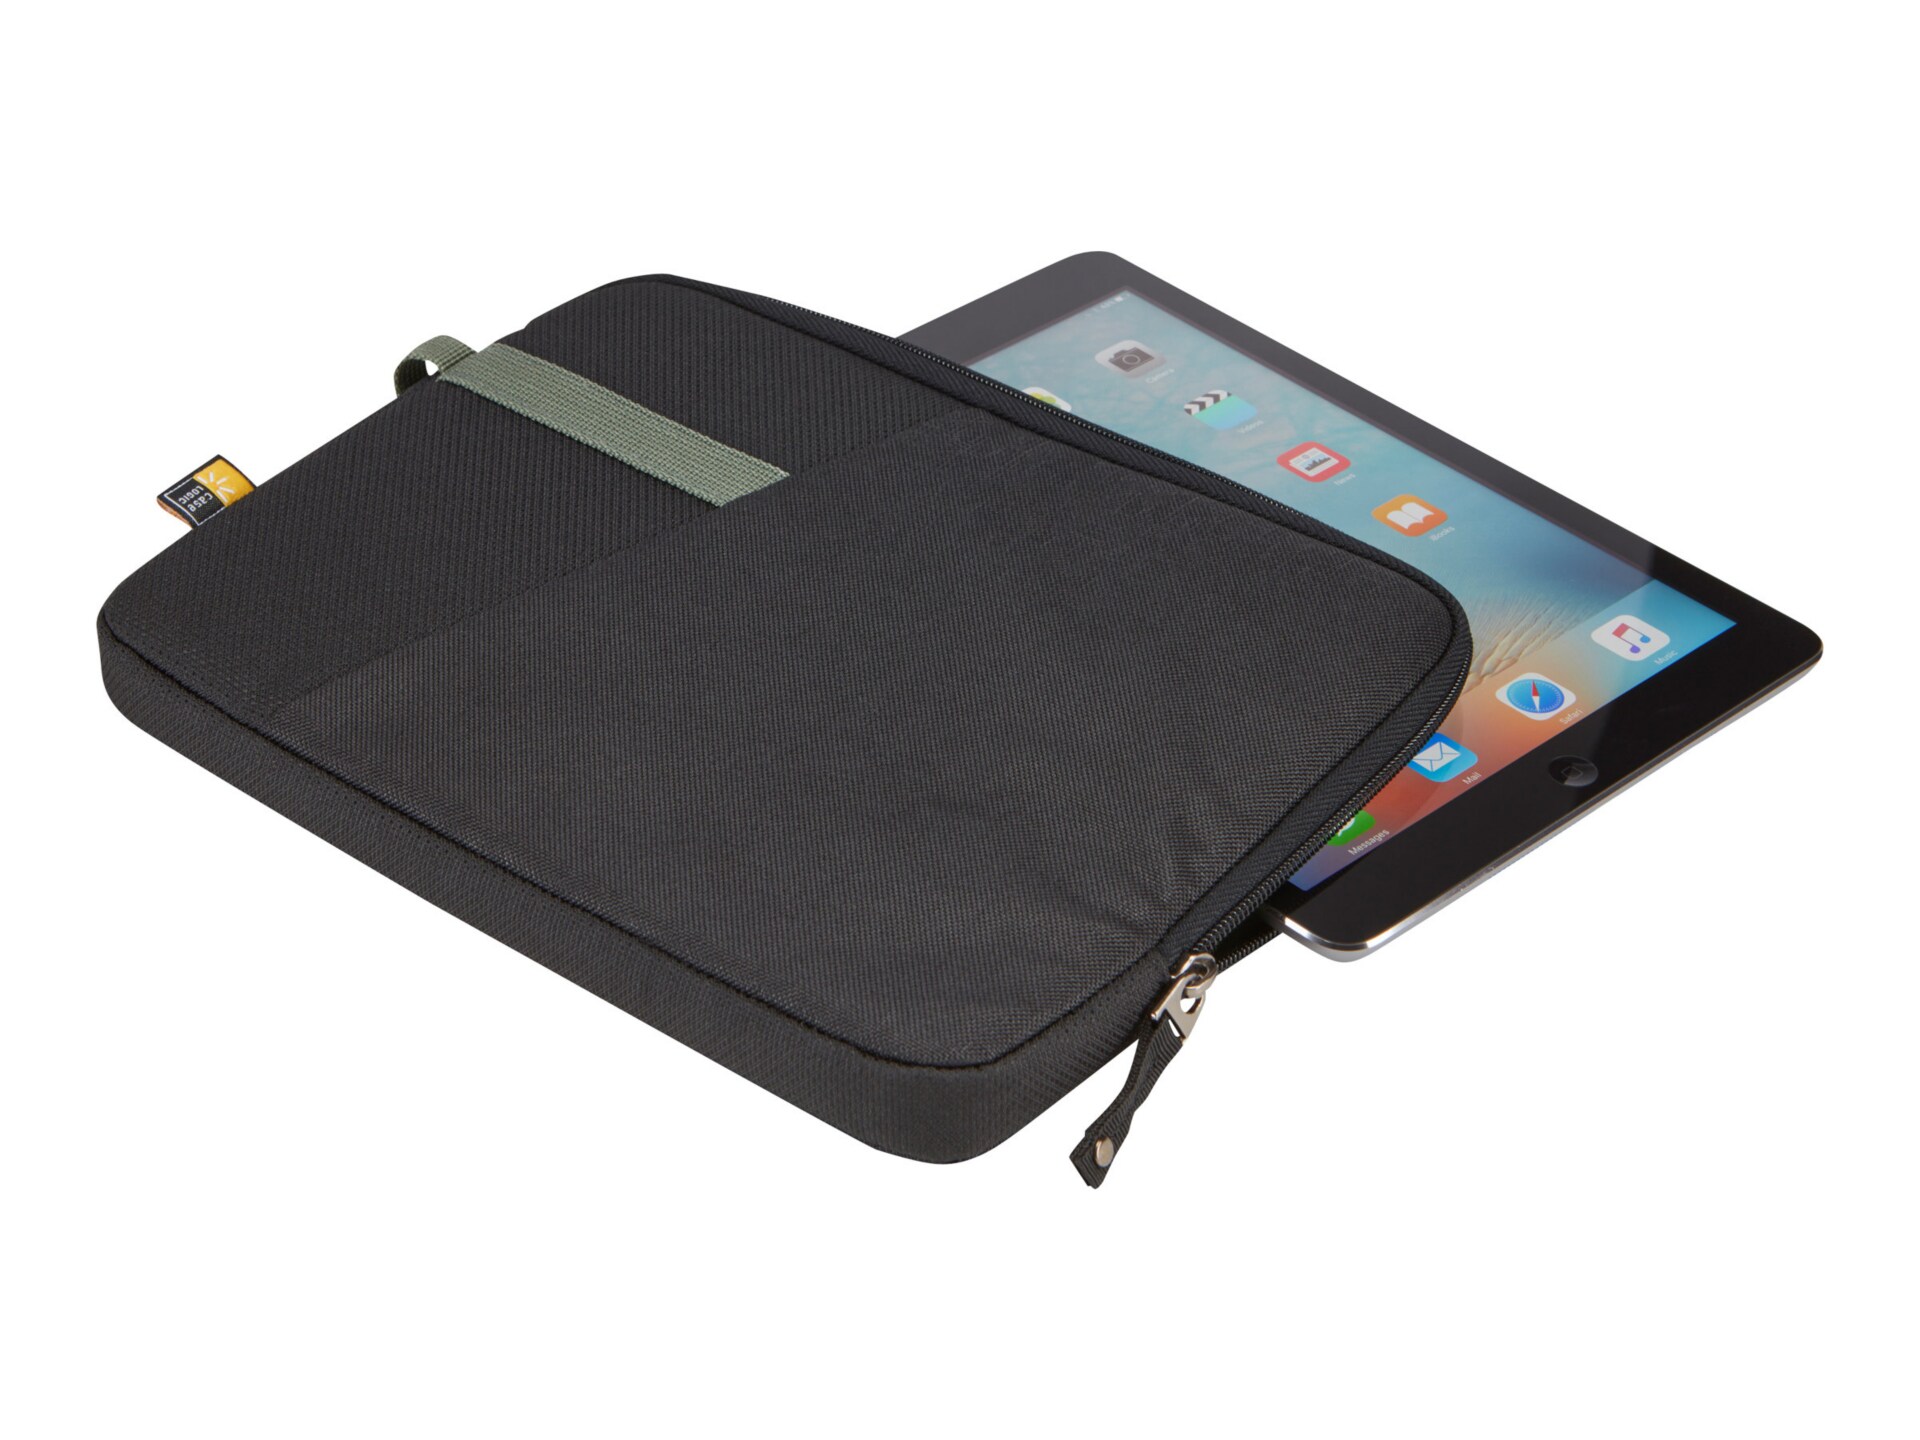 Case Logic Ibira - protective sleeve for tablet